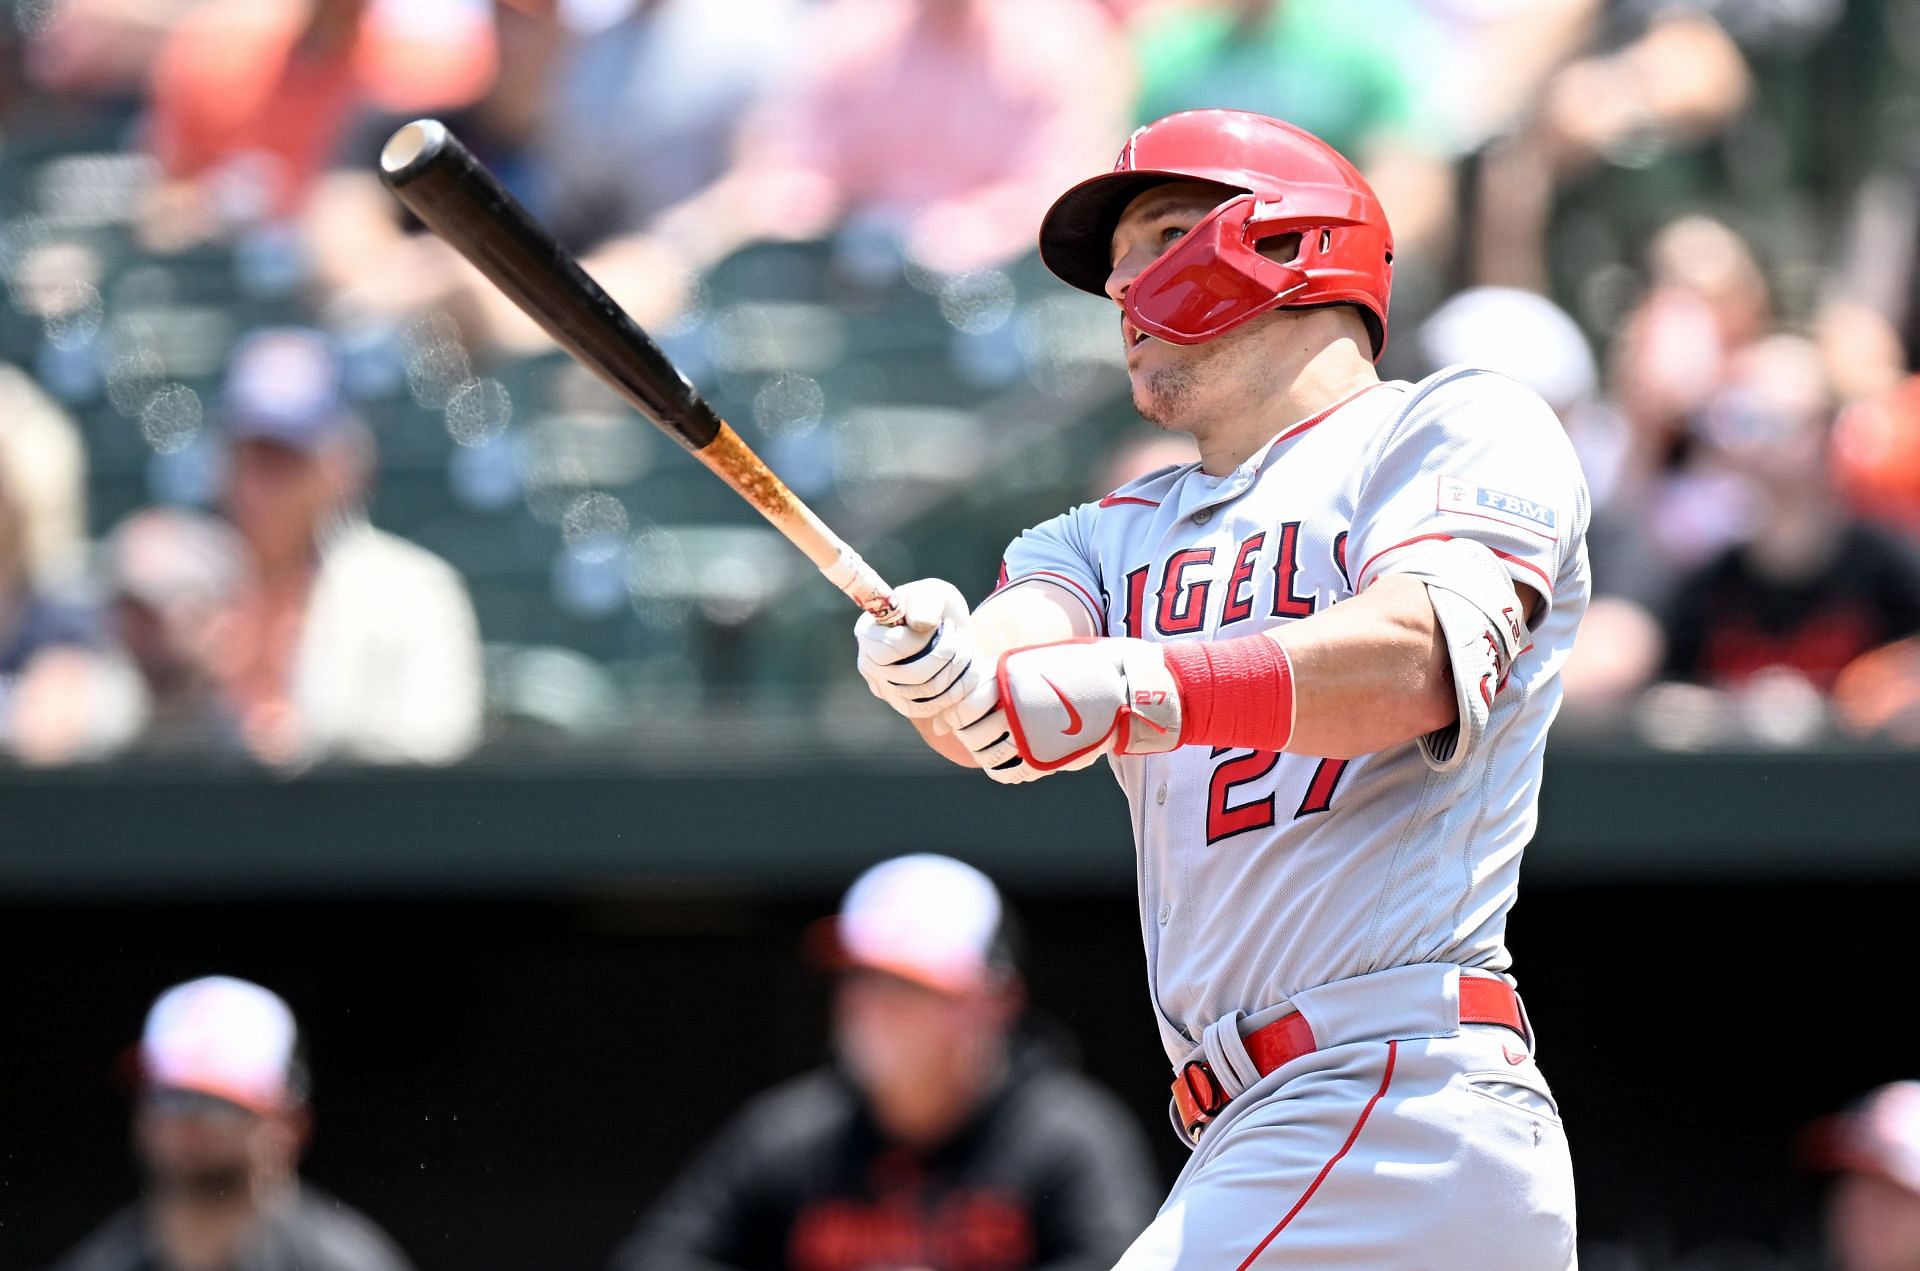 Mike Trout of the Los Angeles Angels hits a two-run home run against the Baltimore Orioles at Oriole Park at Camden Yards